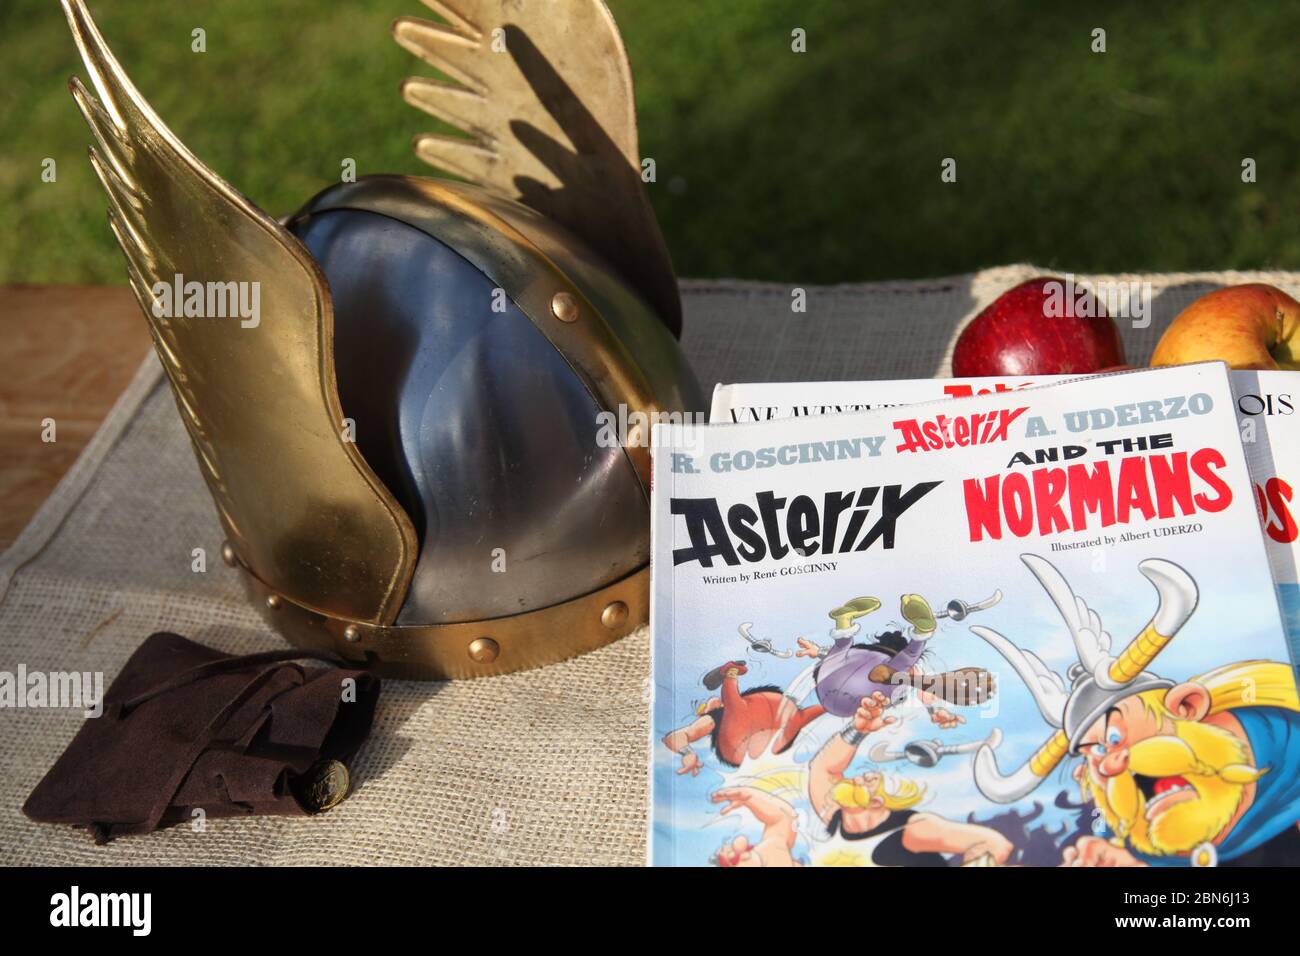 Asterix and the Normans by Jean-Yves Ferri, Illustrated by Didier CONRAD,  book cover, English version in Gaul setting with winged helmet Stock Photo  - Alamy